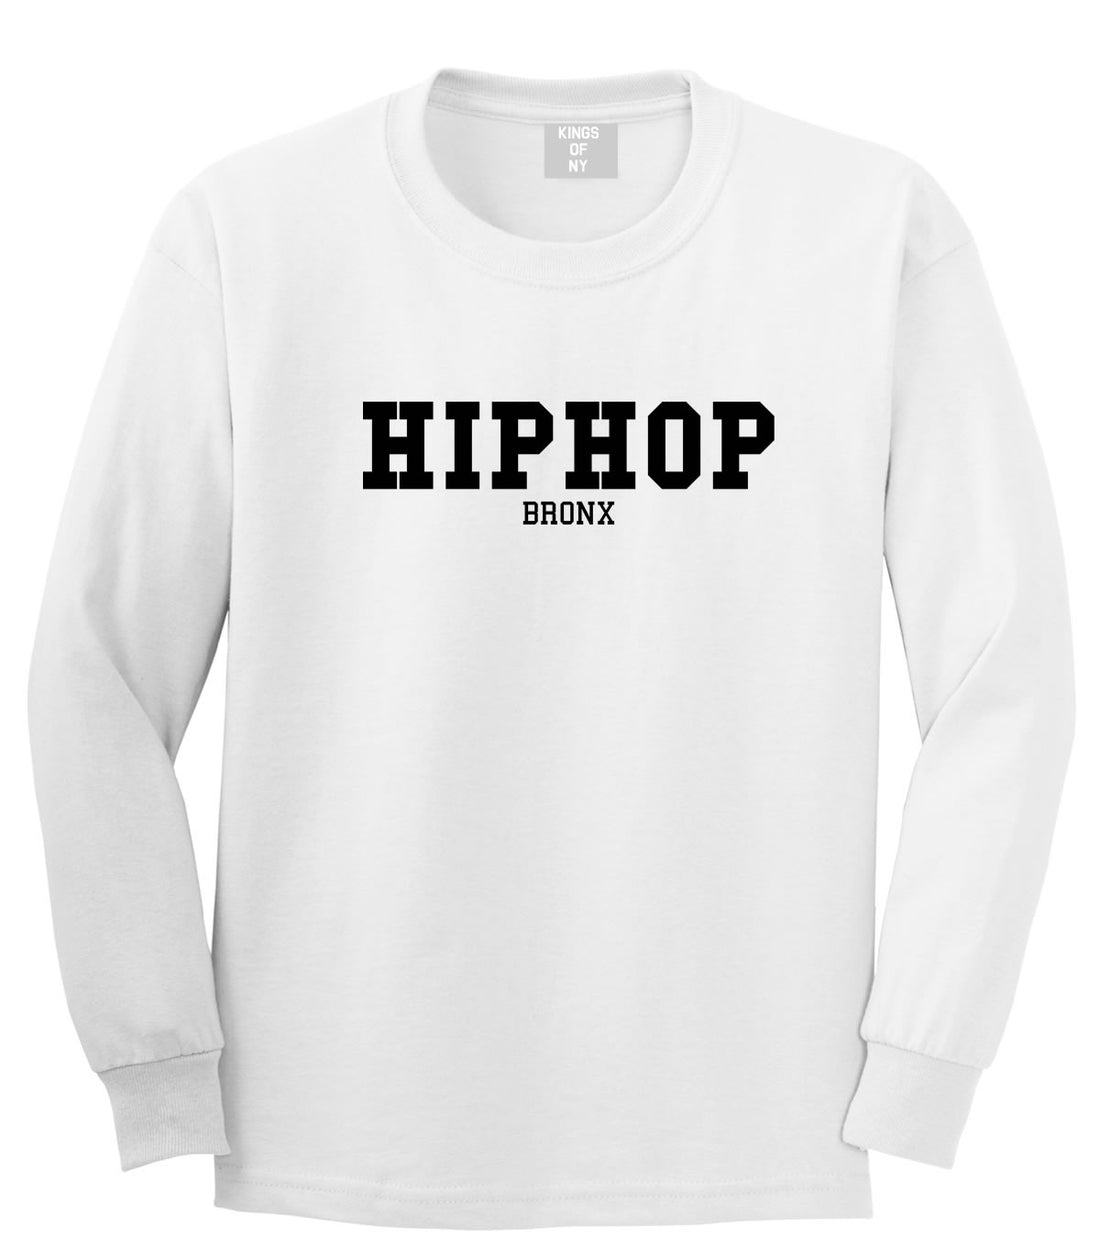 Hiphop the Bronx Long Sleeve T-Shirt in White by Kings Of NY